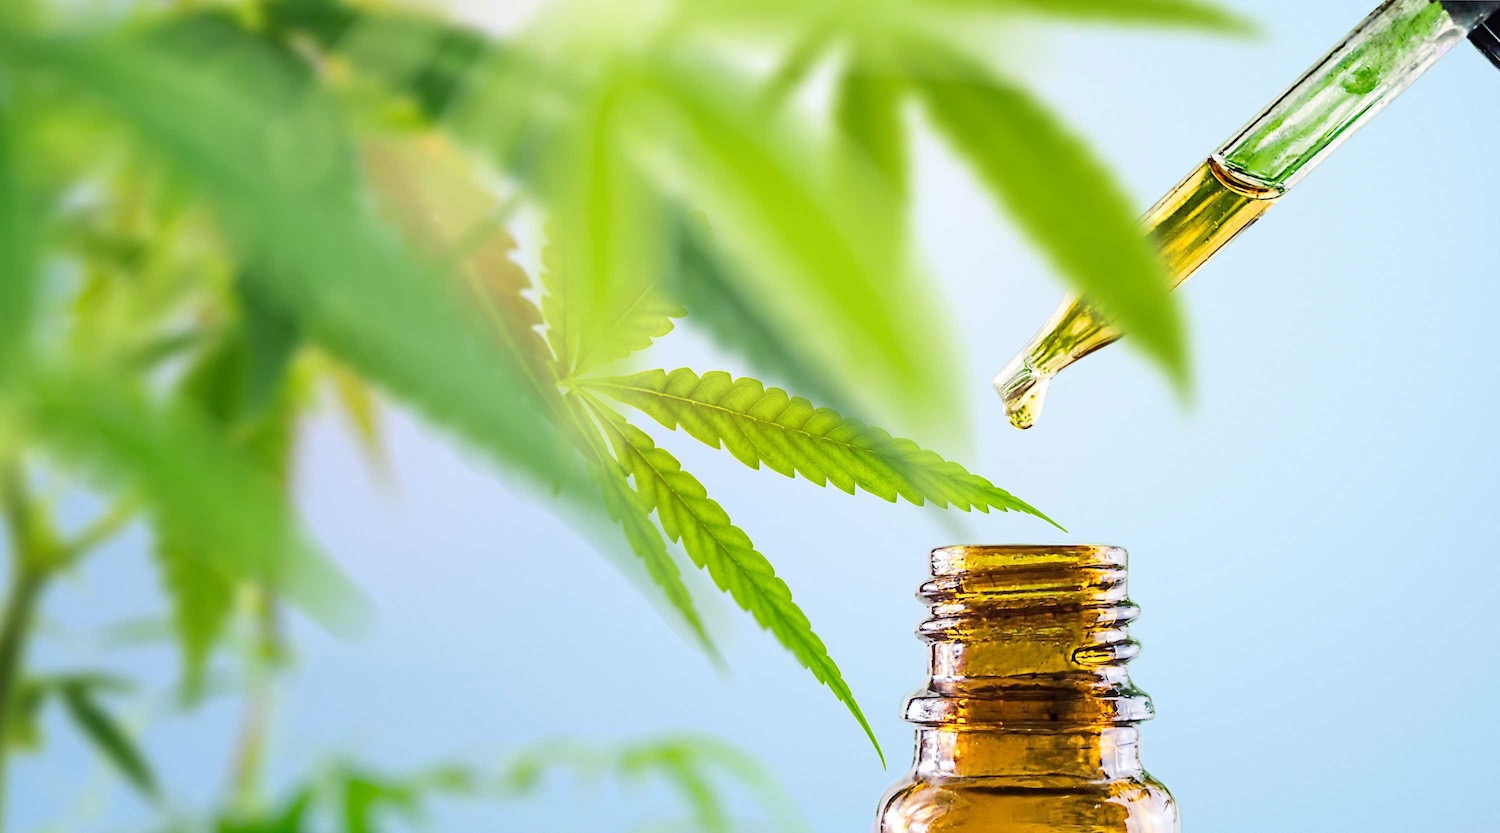 How to Make Cannabis Oil?